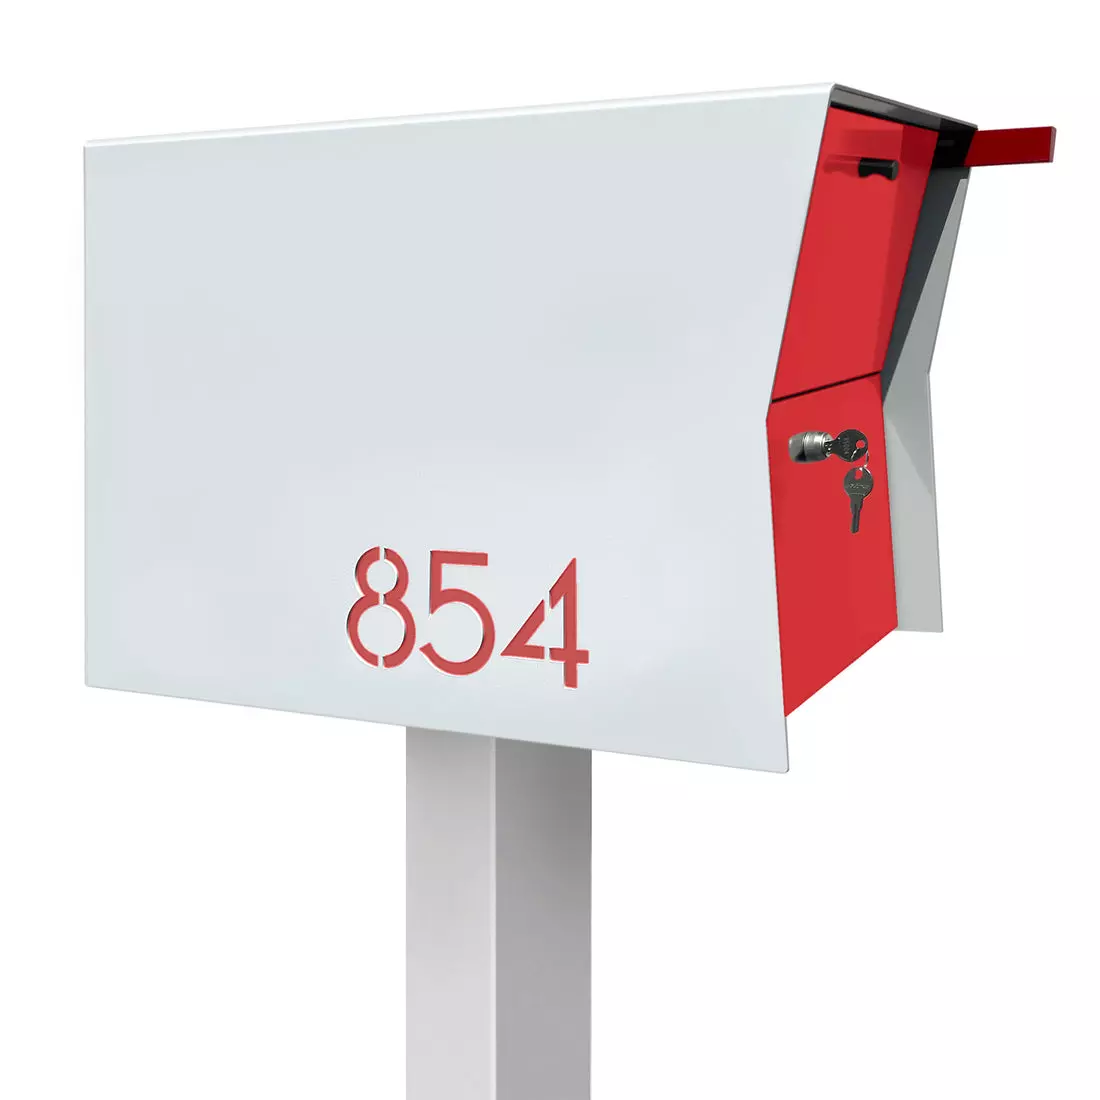 The Retrobox Locking Package Dropbox in ARCTIC WHITE – Modern Mailbox Product Image